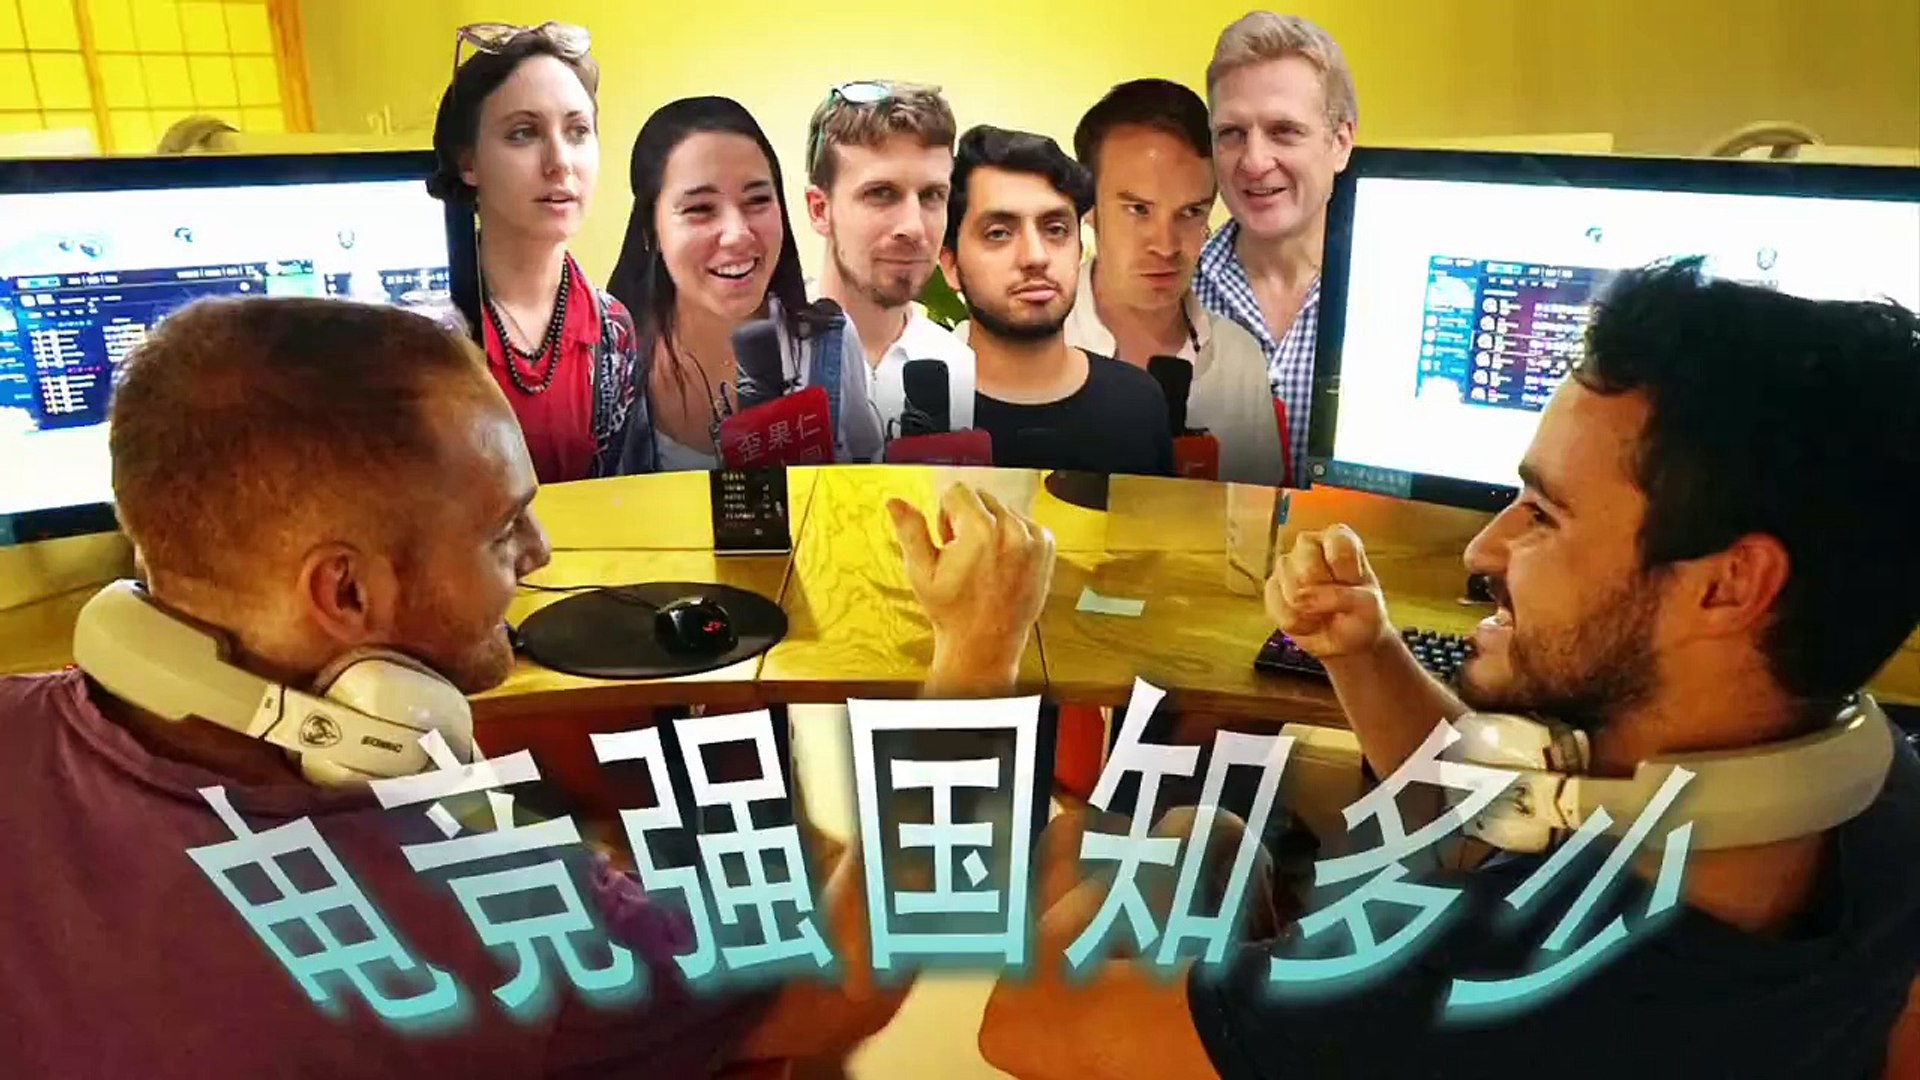 【Video】Playing electronic games could win honor for your country, How do you like the idea?